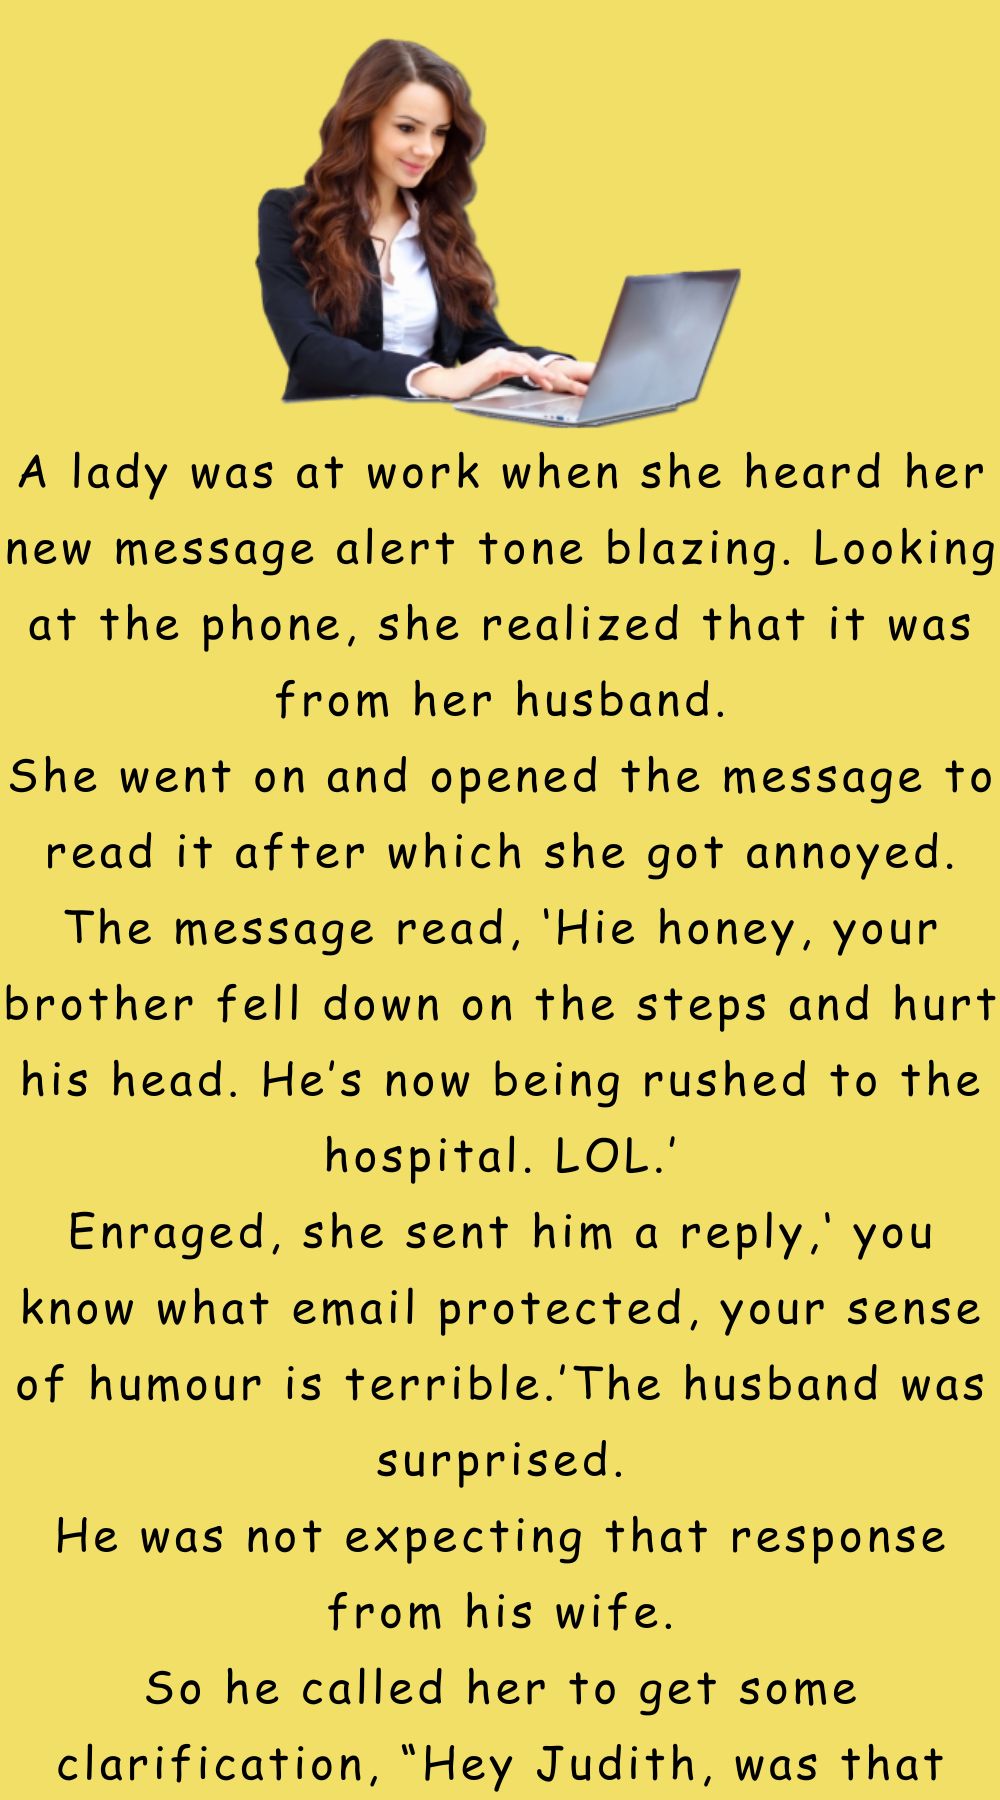 A lady was at work when she heard her new message